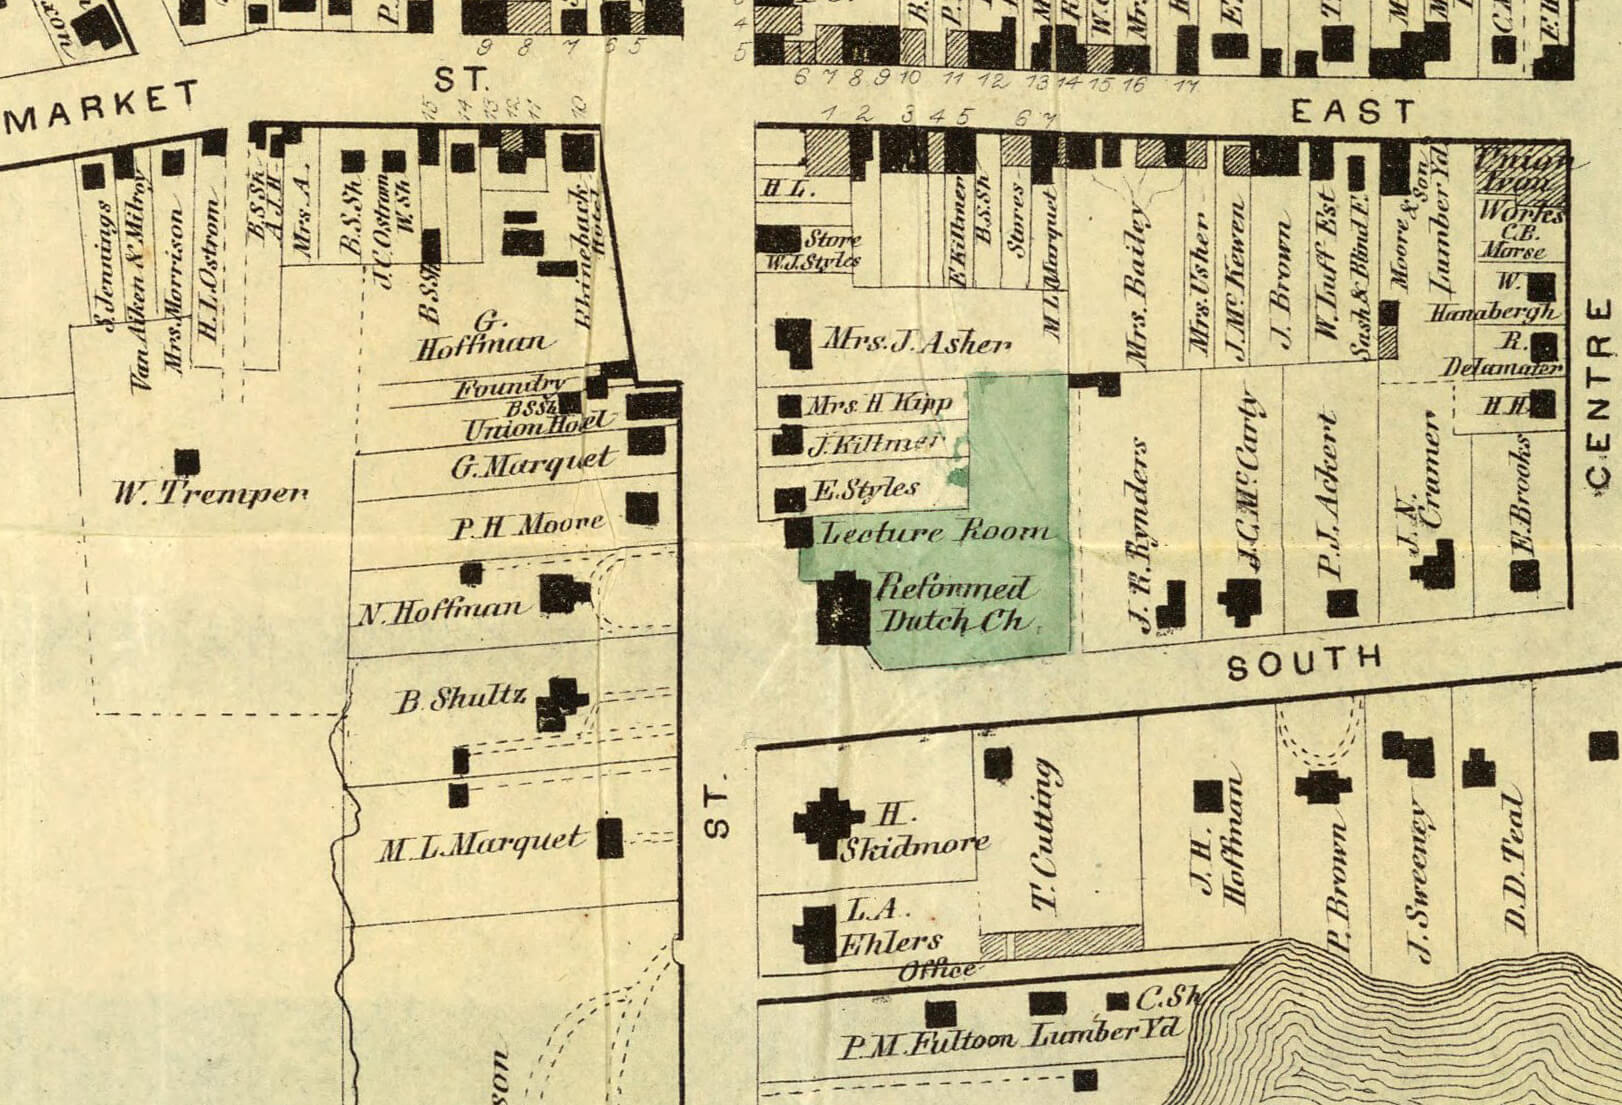 By 1867 the house is indicated as the property of B. Schultz while Peter M. Fulton has a lumber yard on the other side of Mill Street